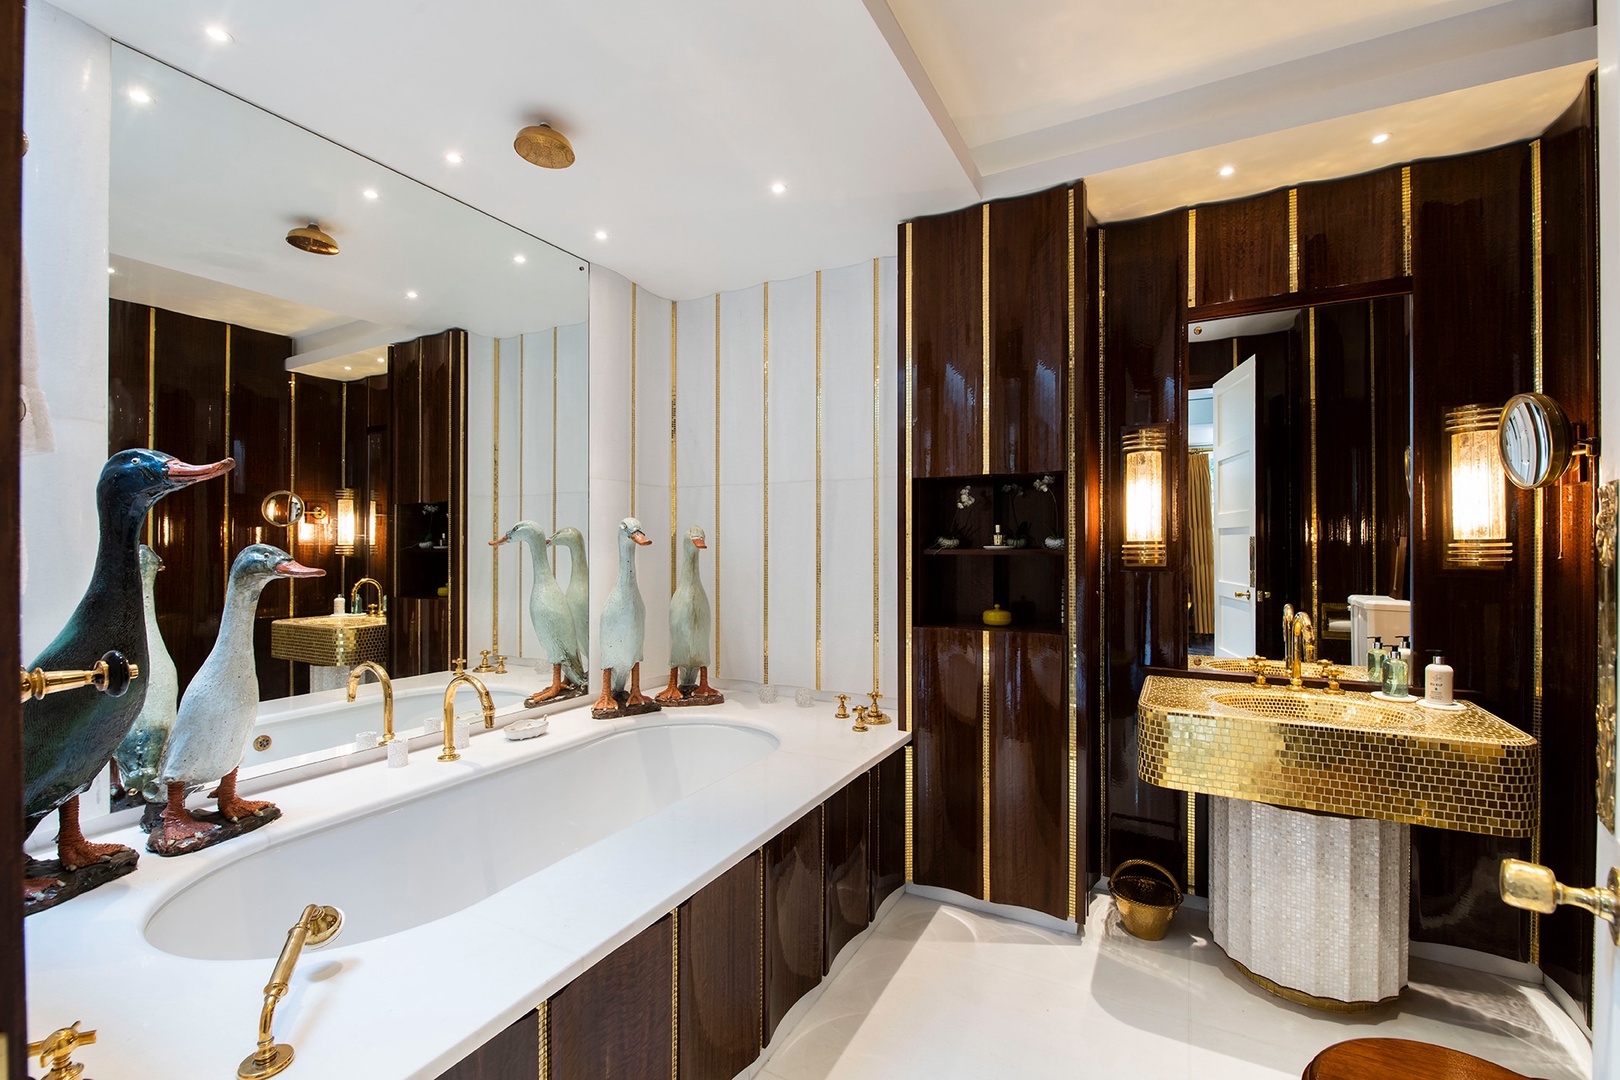 En suite bathroom in bedroom 1 with wood paneling and gold mosaic details.